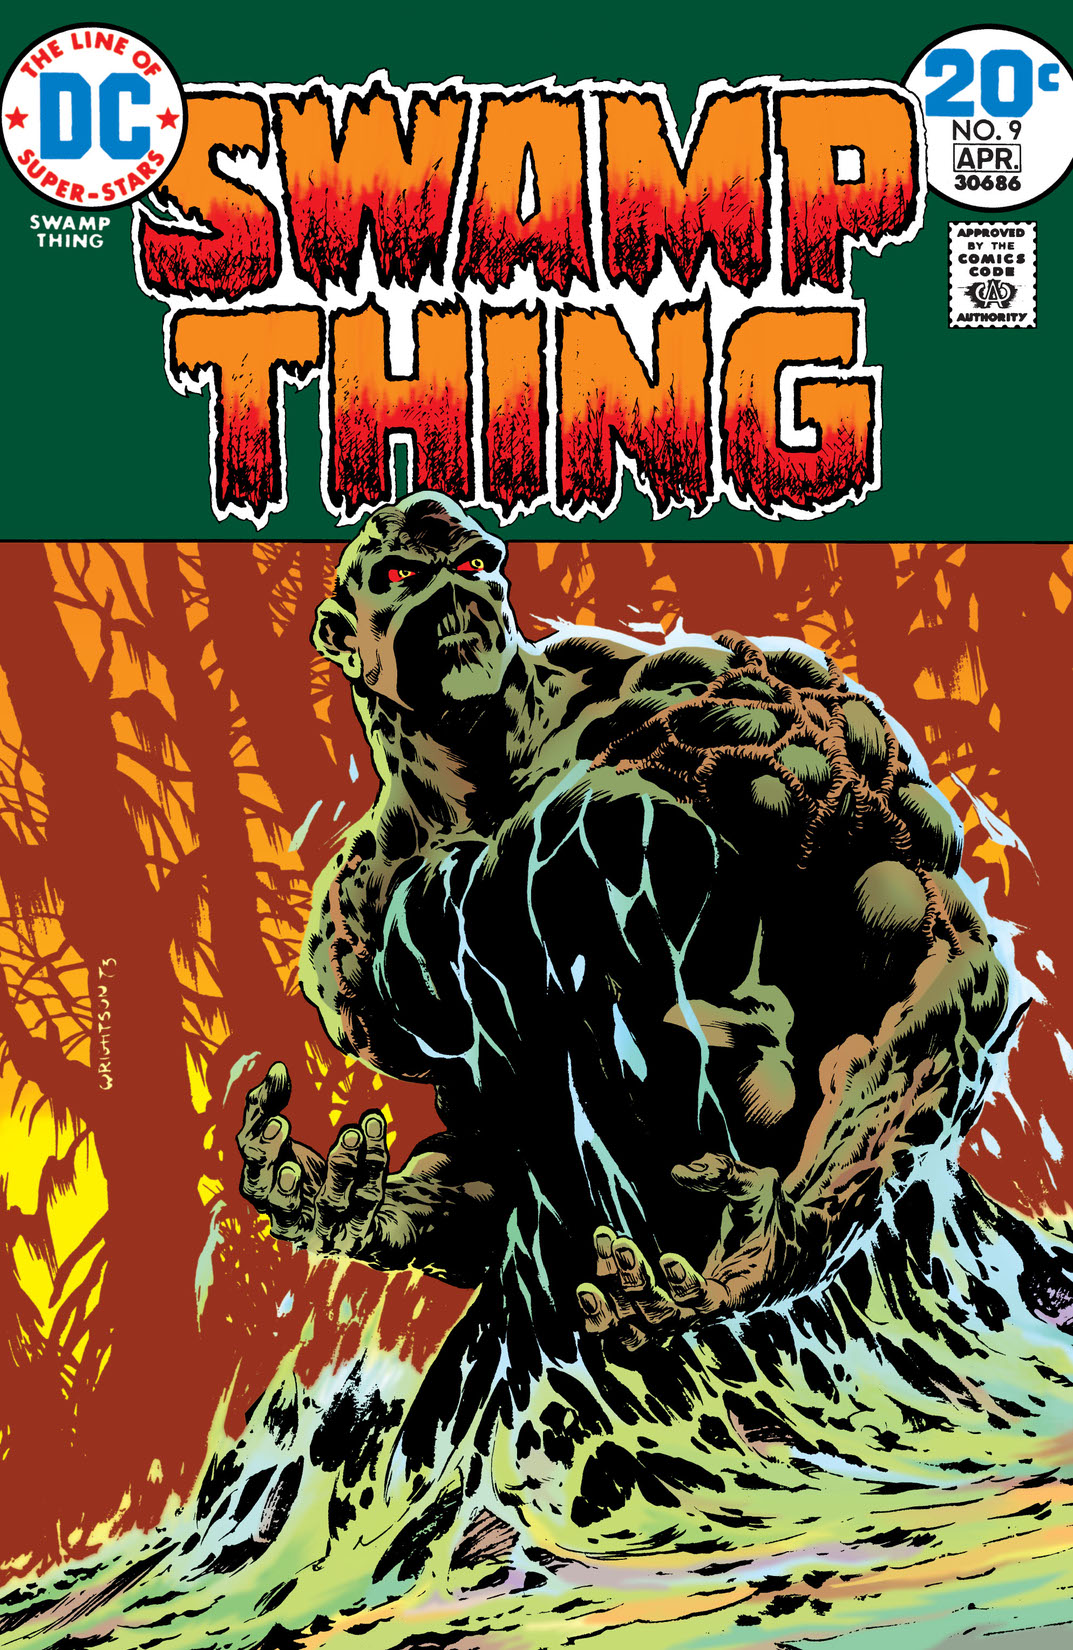 Swamp Thing (1972-) #9 preview images